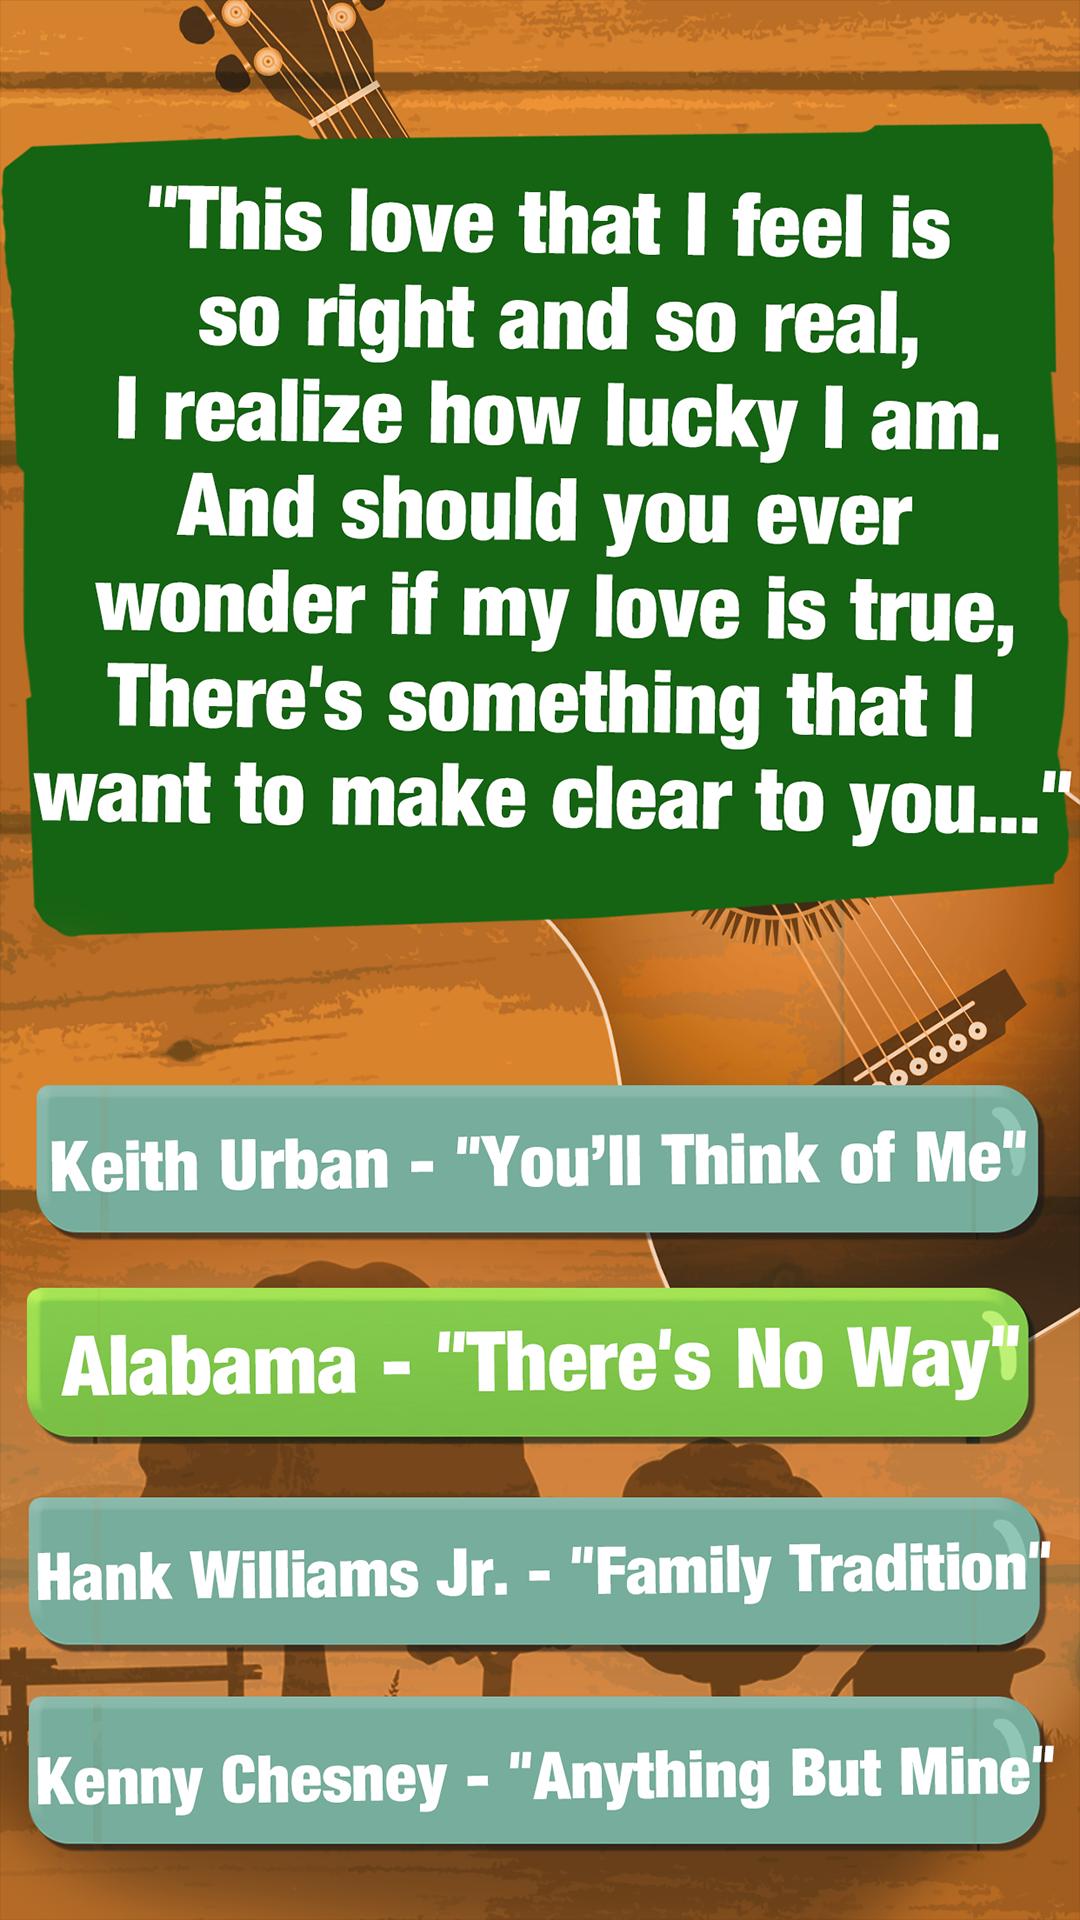 Guess The Lyrics - Country Music Quiz for Android - APK Download